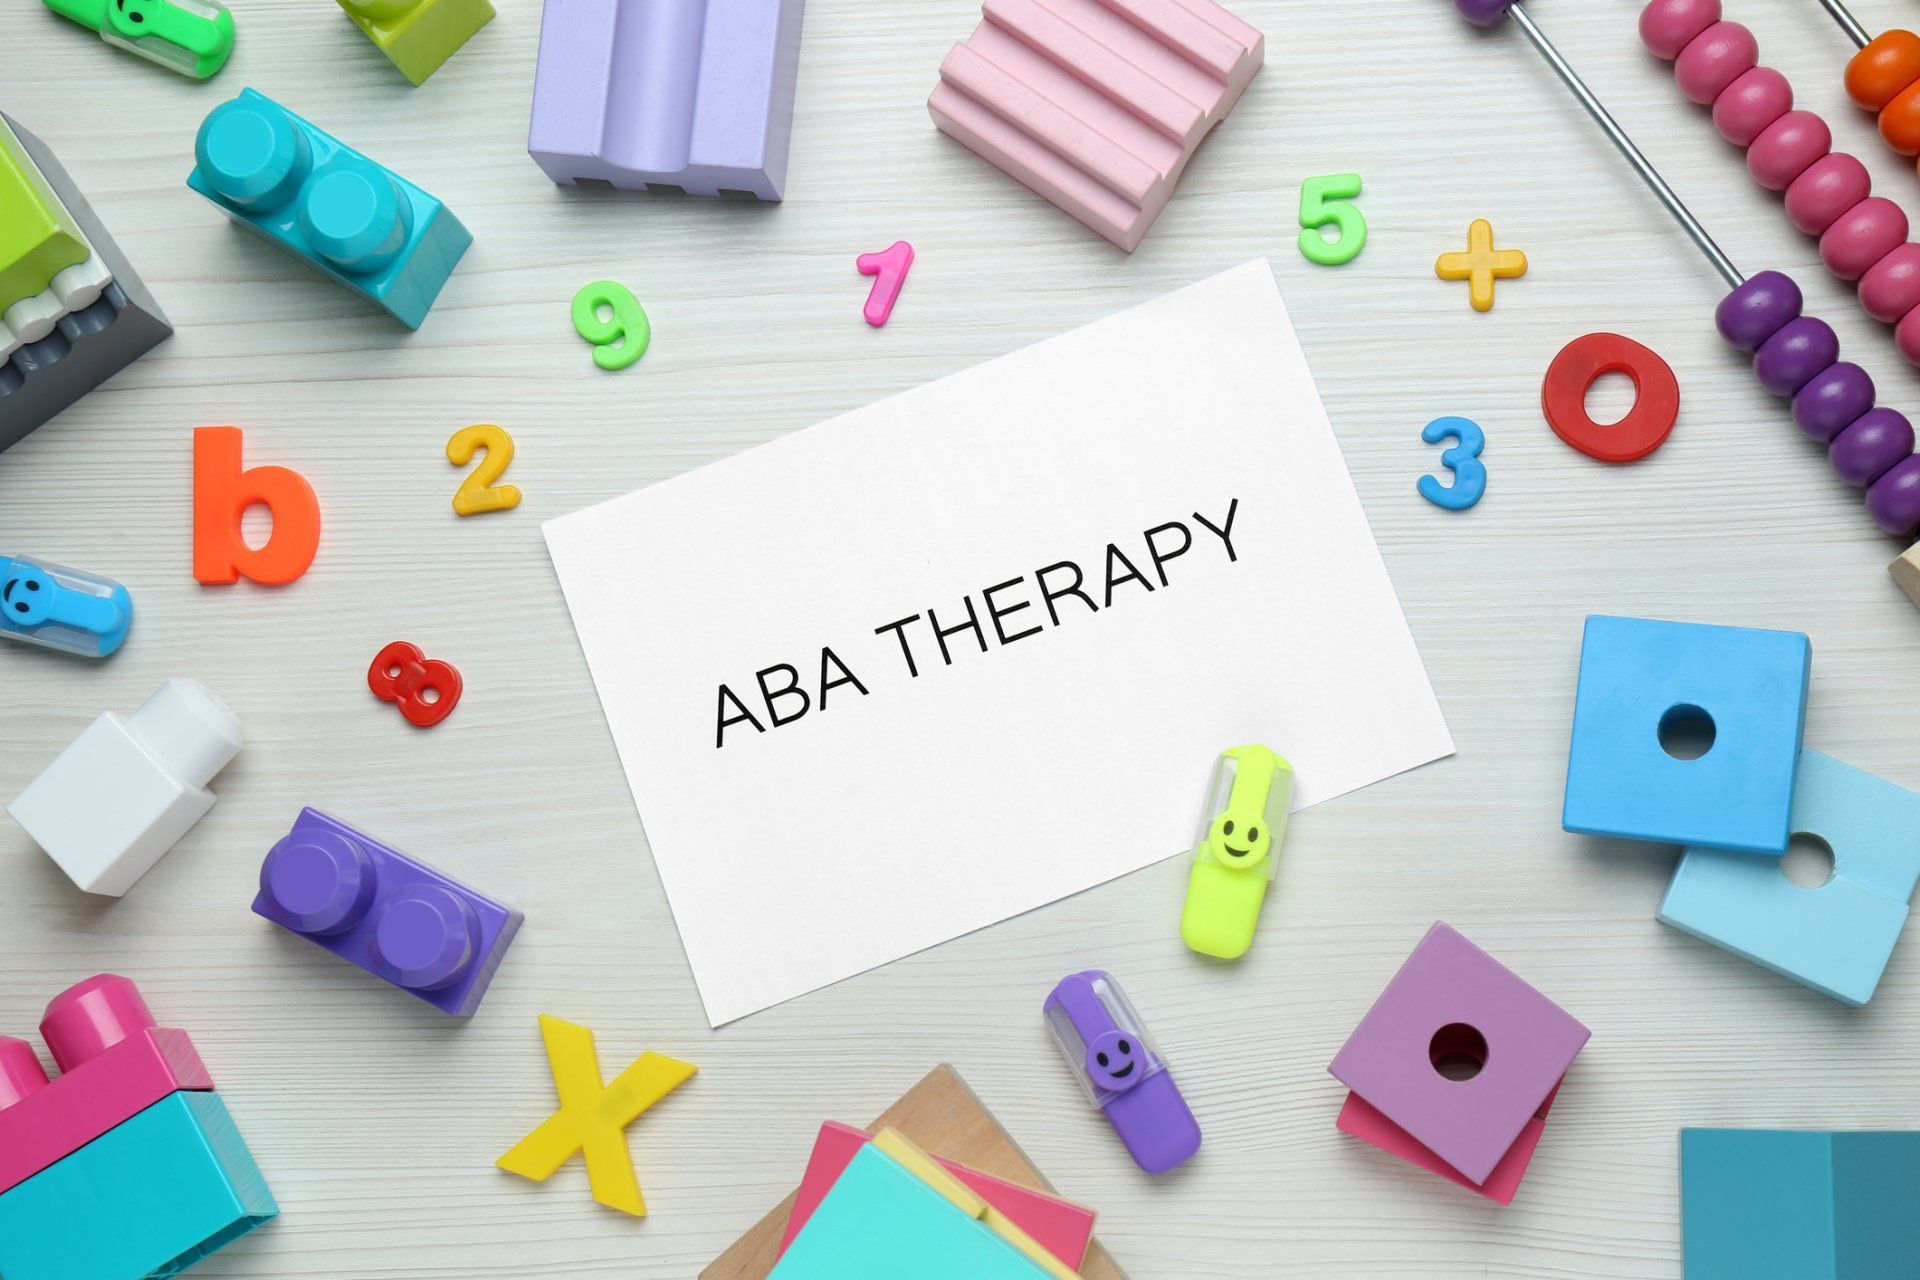 ABA Therapy